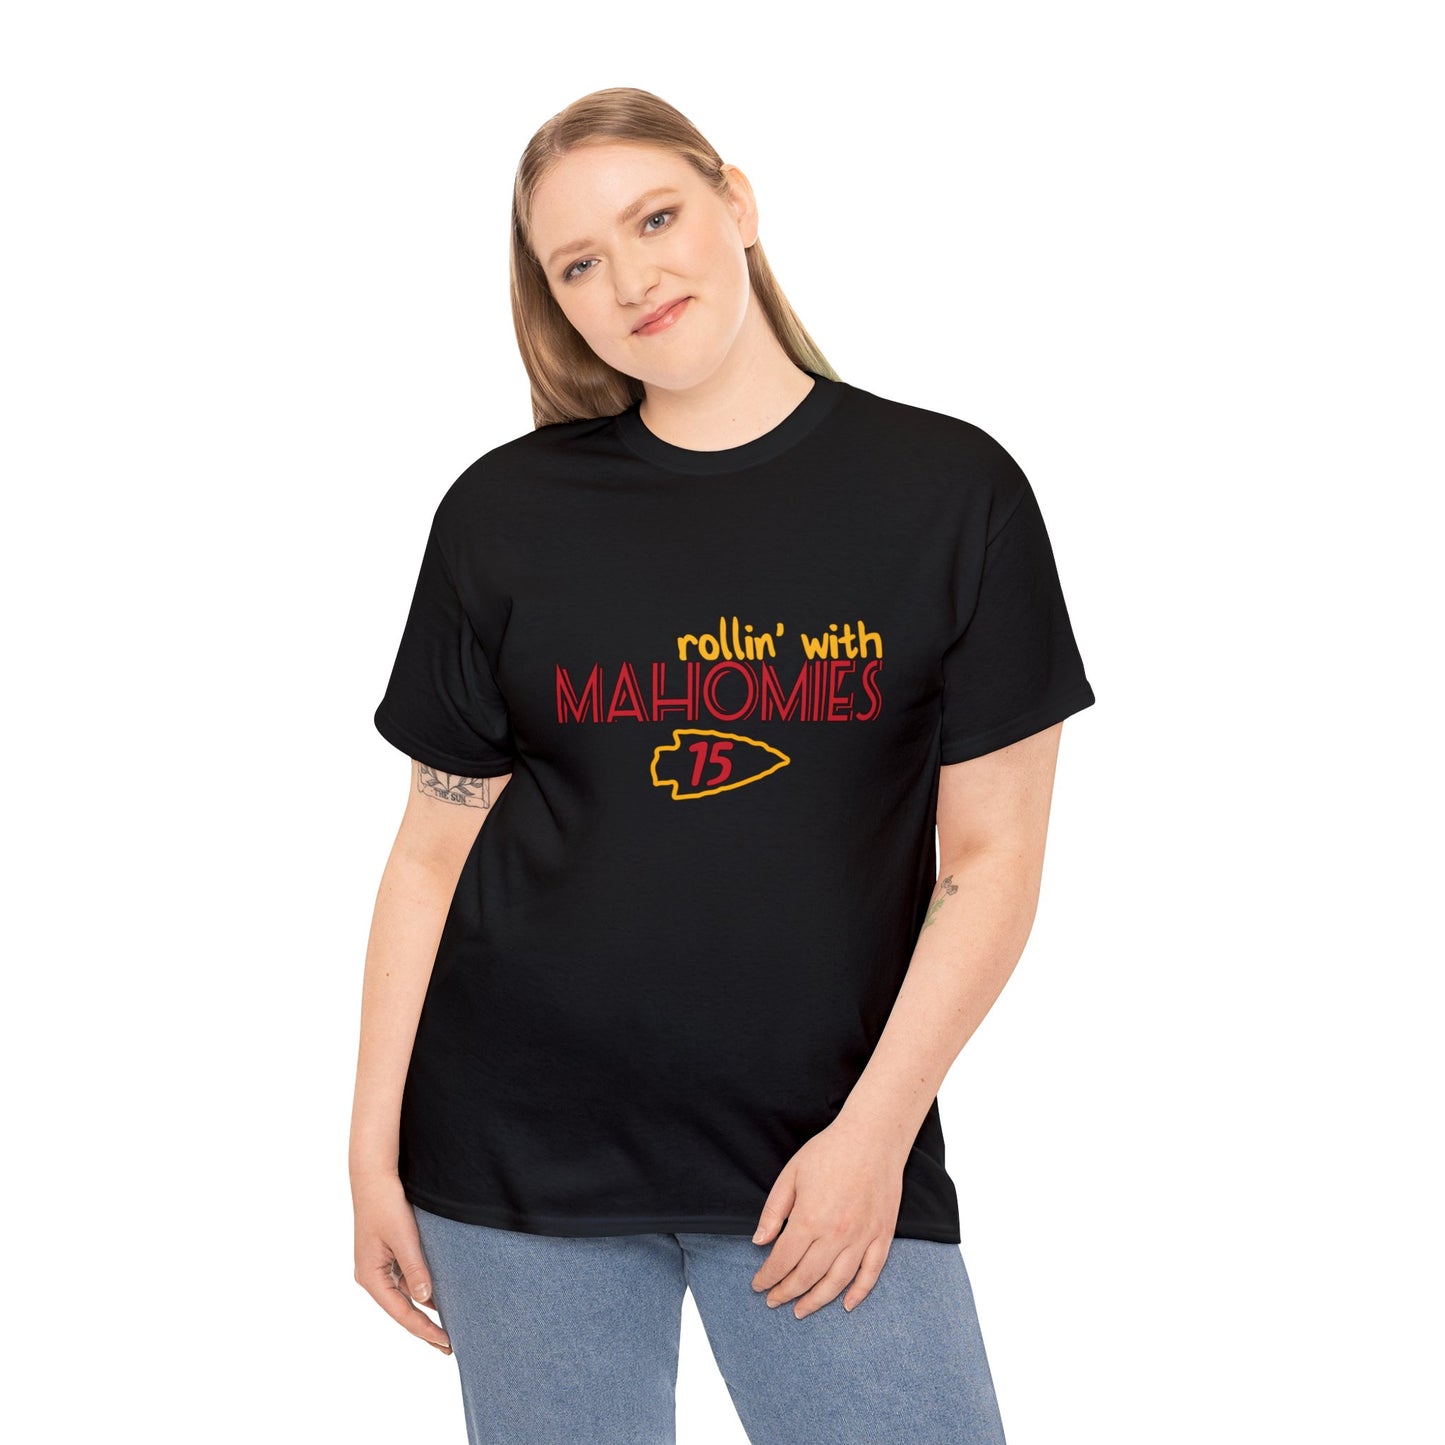 Vibrant "Rollin With Mahomies" Patrick Mahomes T-shirt for Chiefs fans.